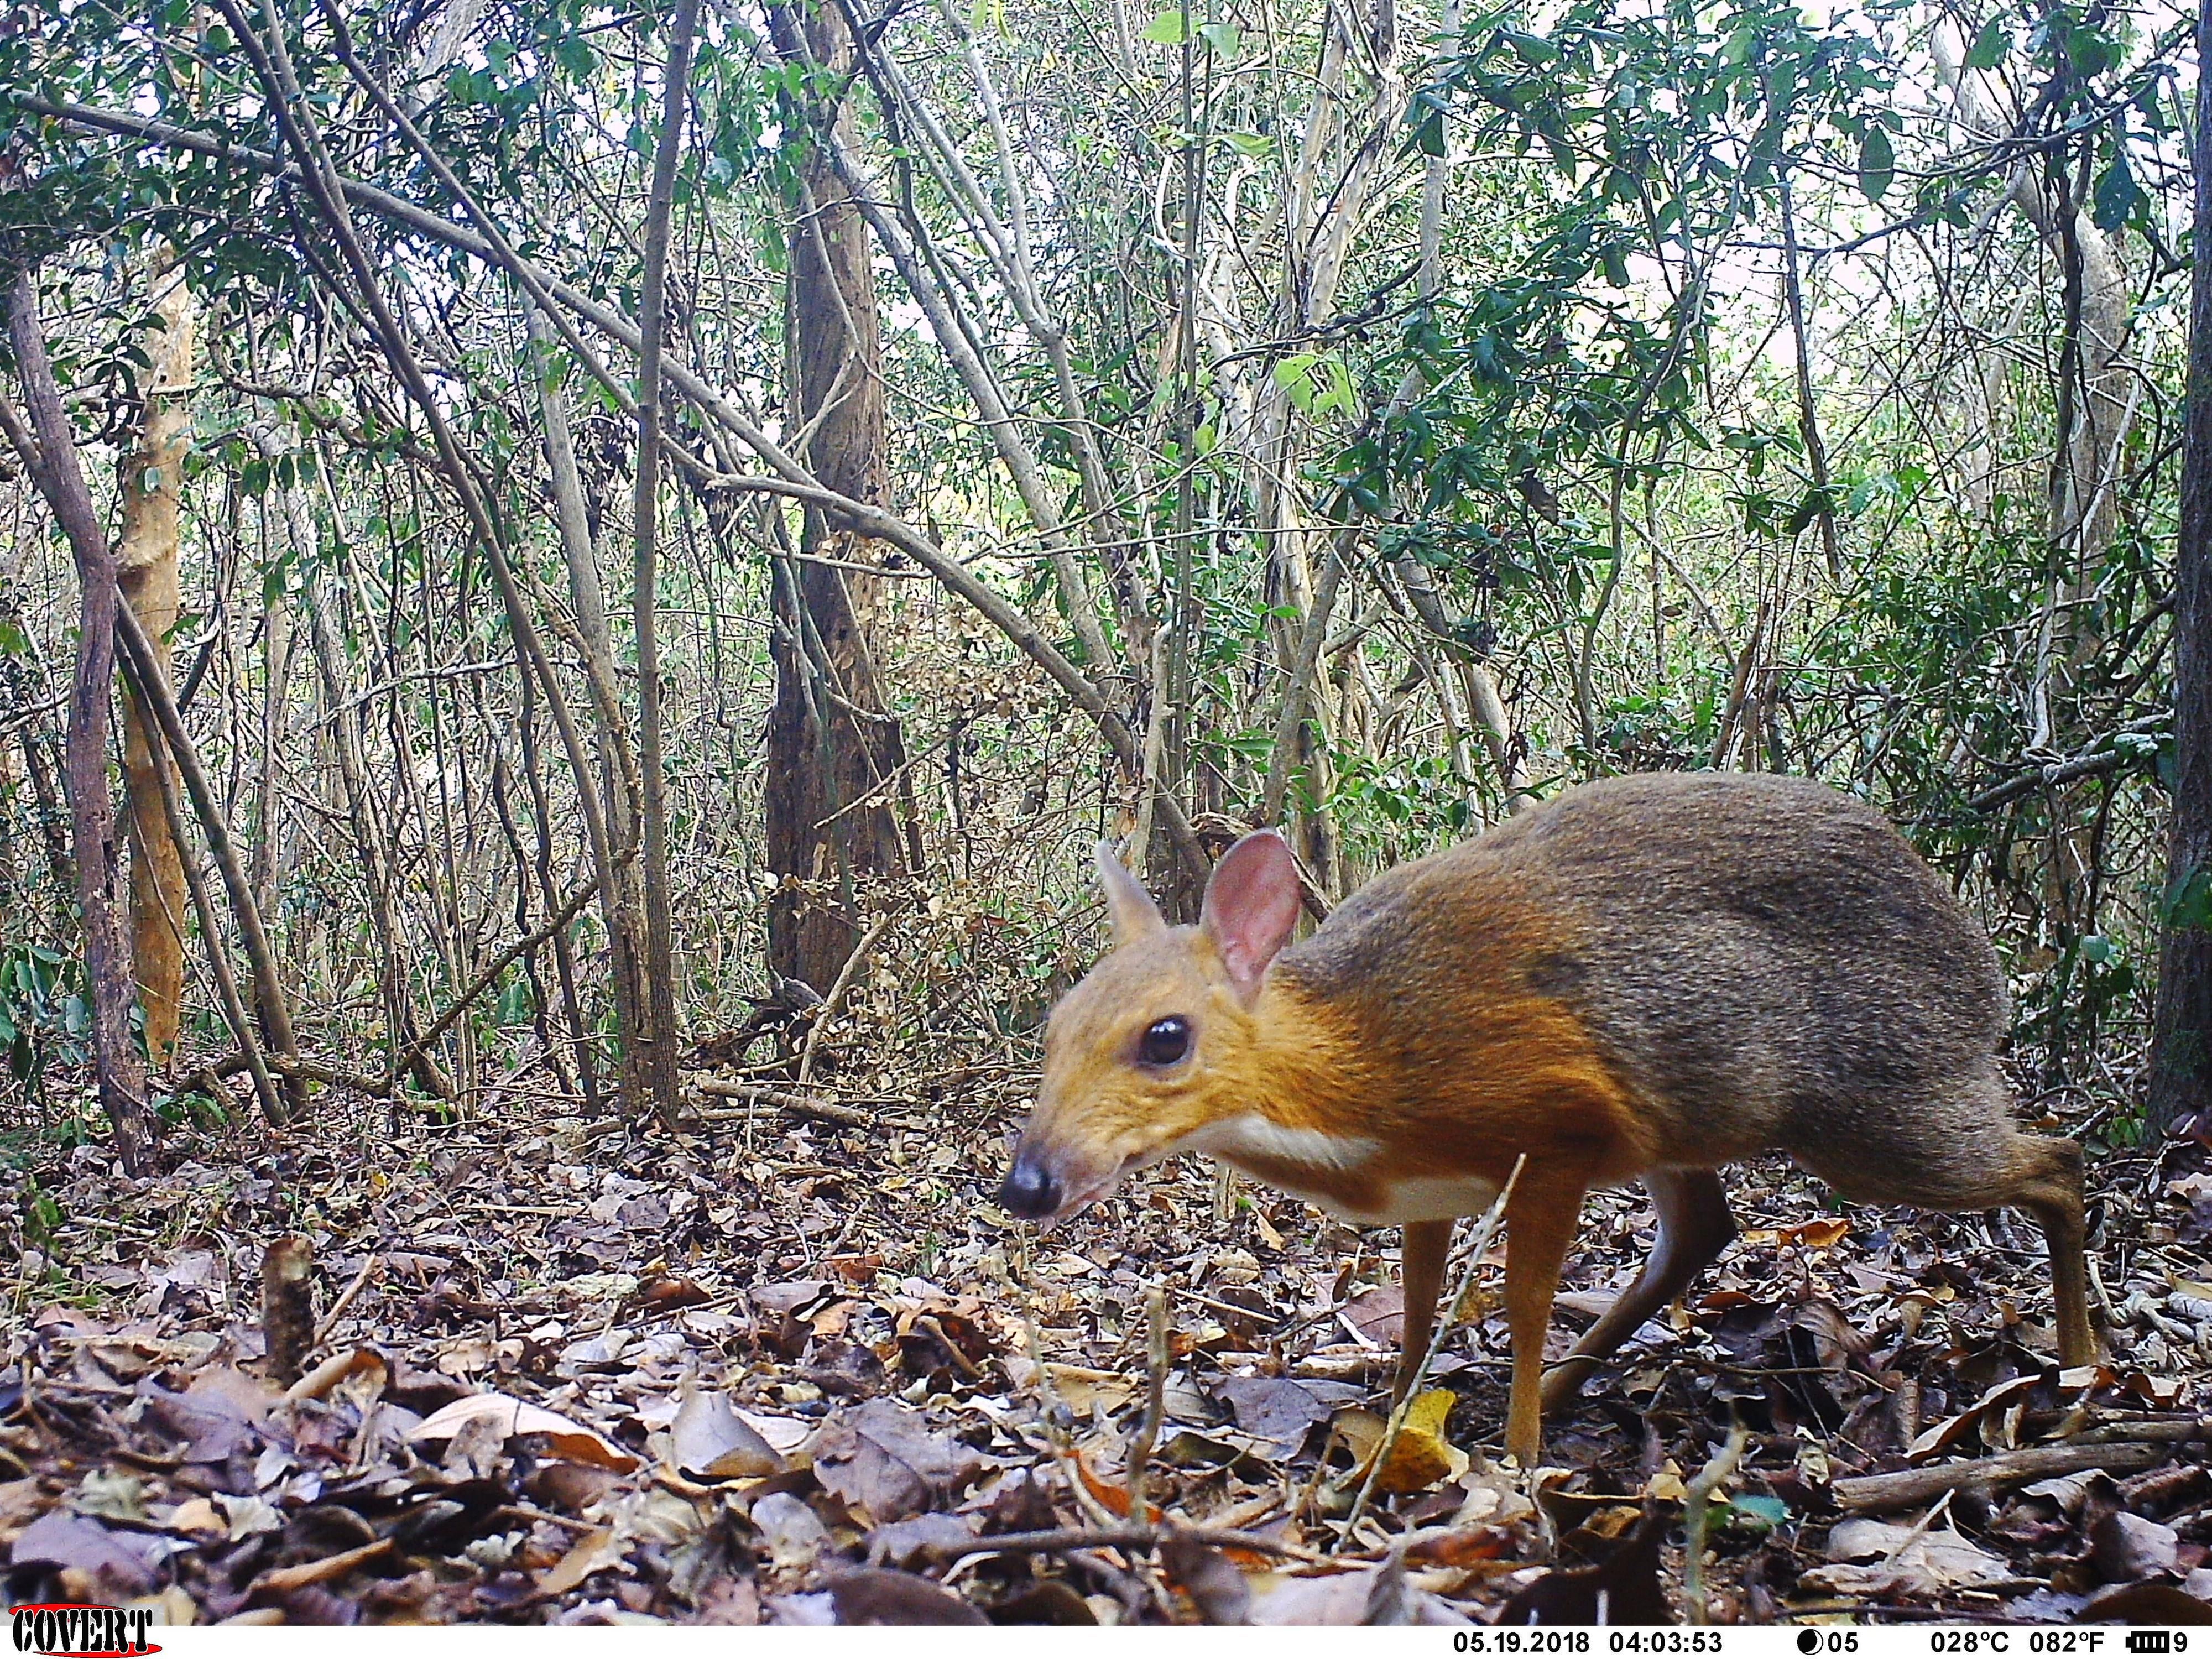 Missing For 30 Years A Rare Deer Species Is Rediscovered In Vietnam